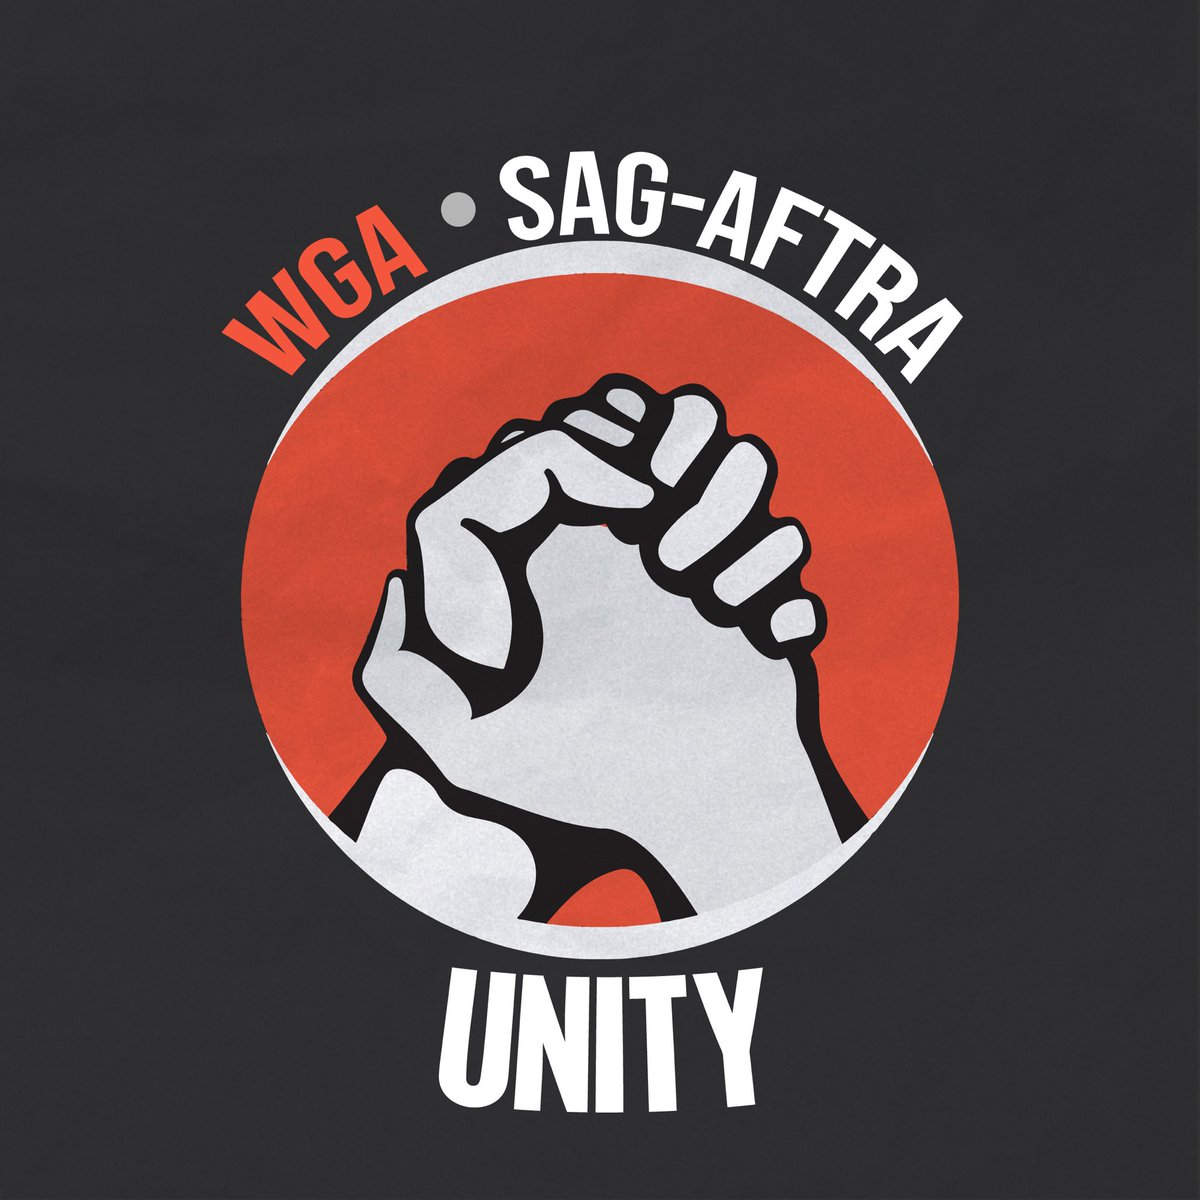 Going into Day 74 and our Supporting Cast got bumped to Series Regulars. It’s going to be a season you won’t wanna miss. #mustseetv #wgastrong #sagaftrastrong #1u #wgastrike #sagaftrastrike